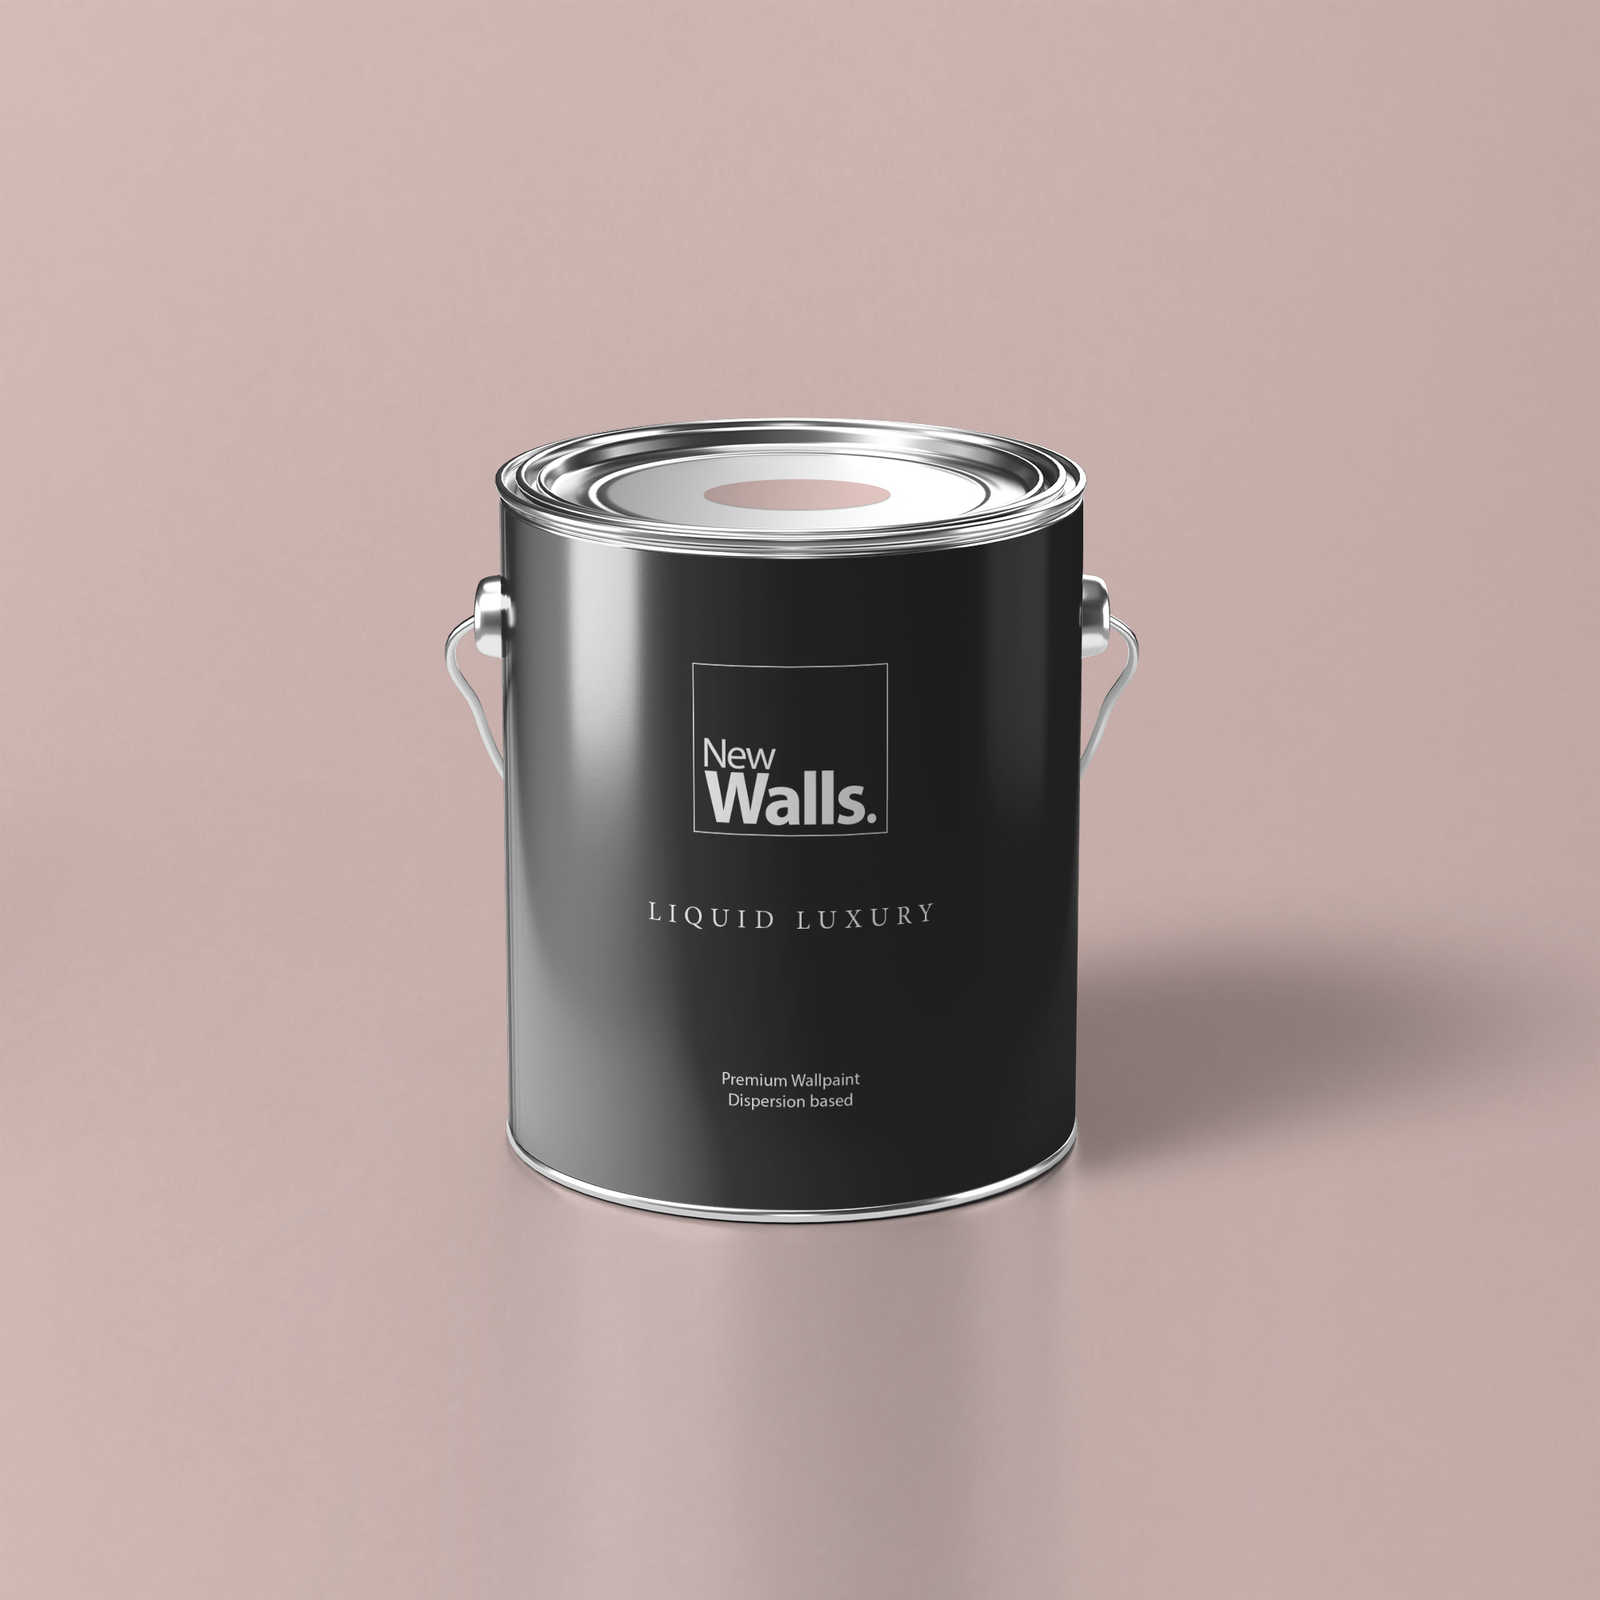 Premium Wall Paint Soft Old Pink »Natural Nude« NW1013 – 5 litre
